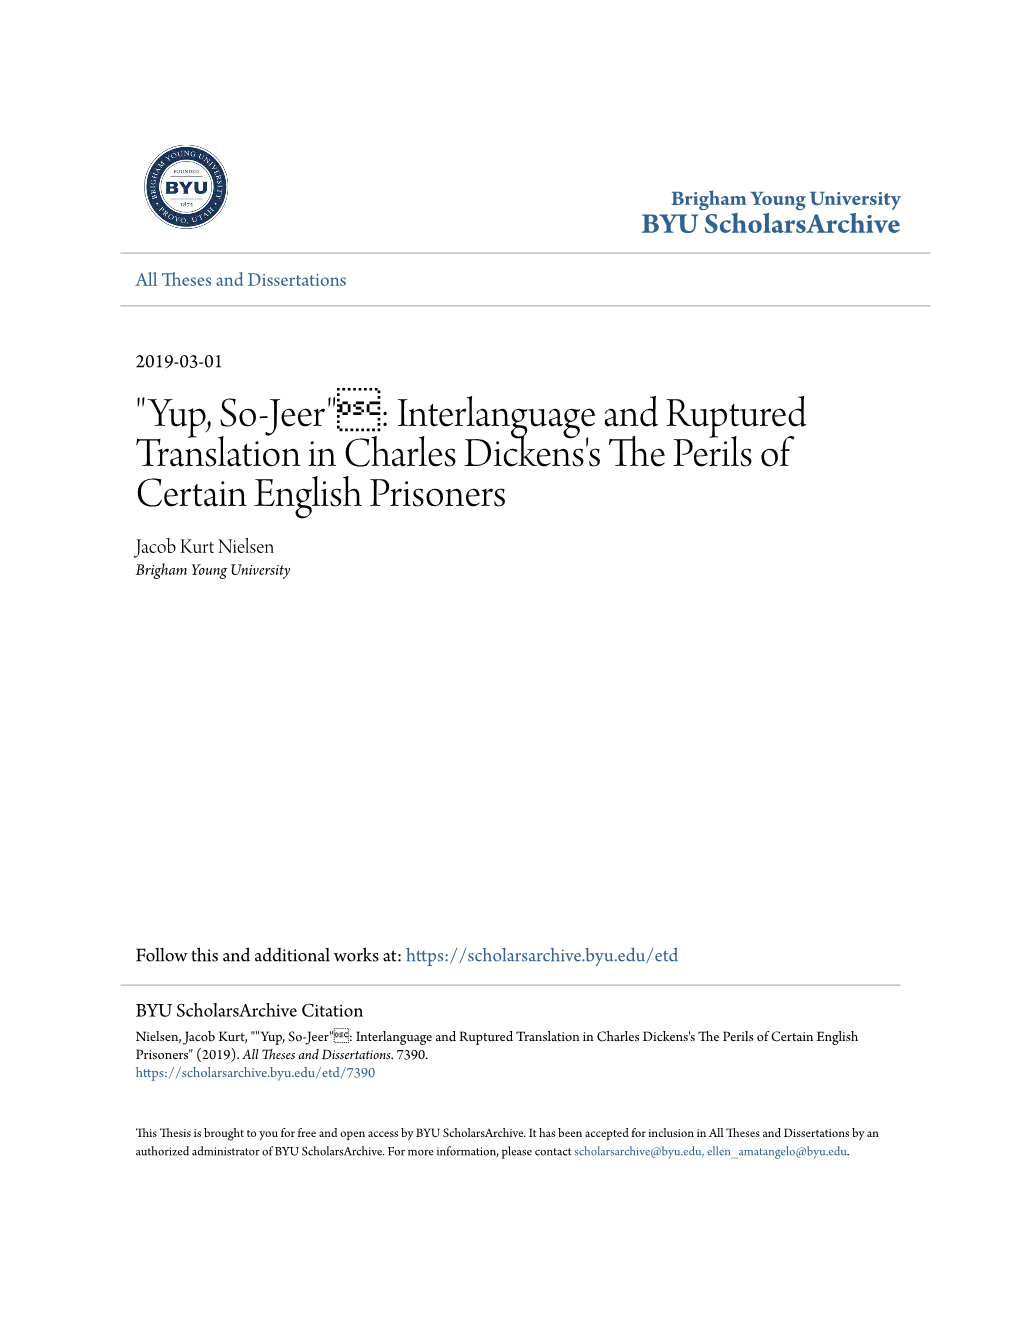 Interlanguage and Ruptured Translation in Charles Dickens's the Ep Rils of Certain English Prisoners Jacob Kurt Nielsen Brigham Young University